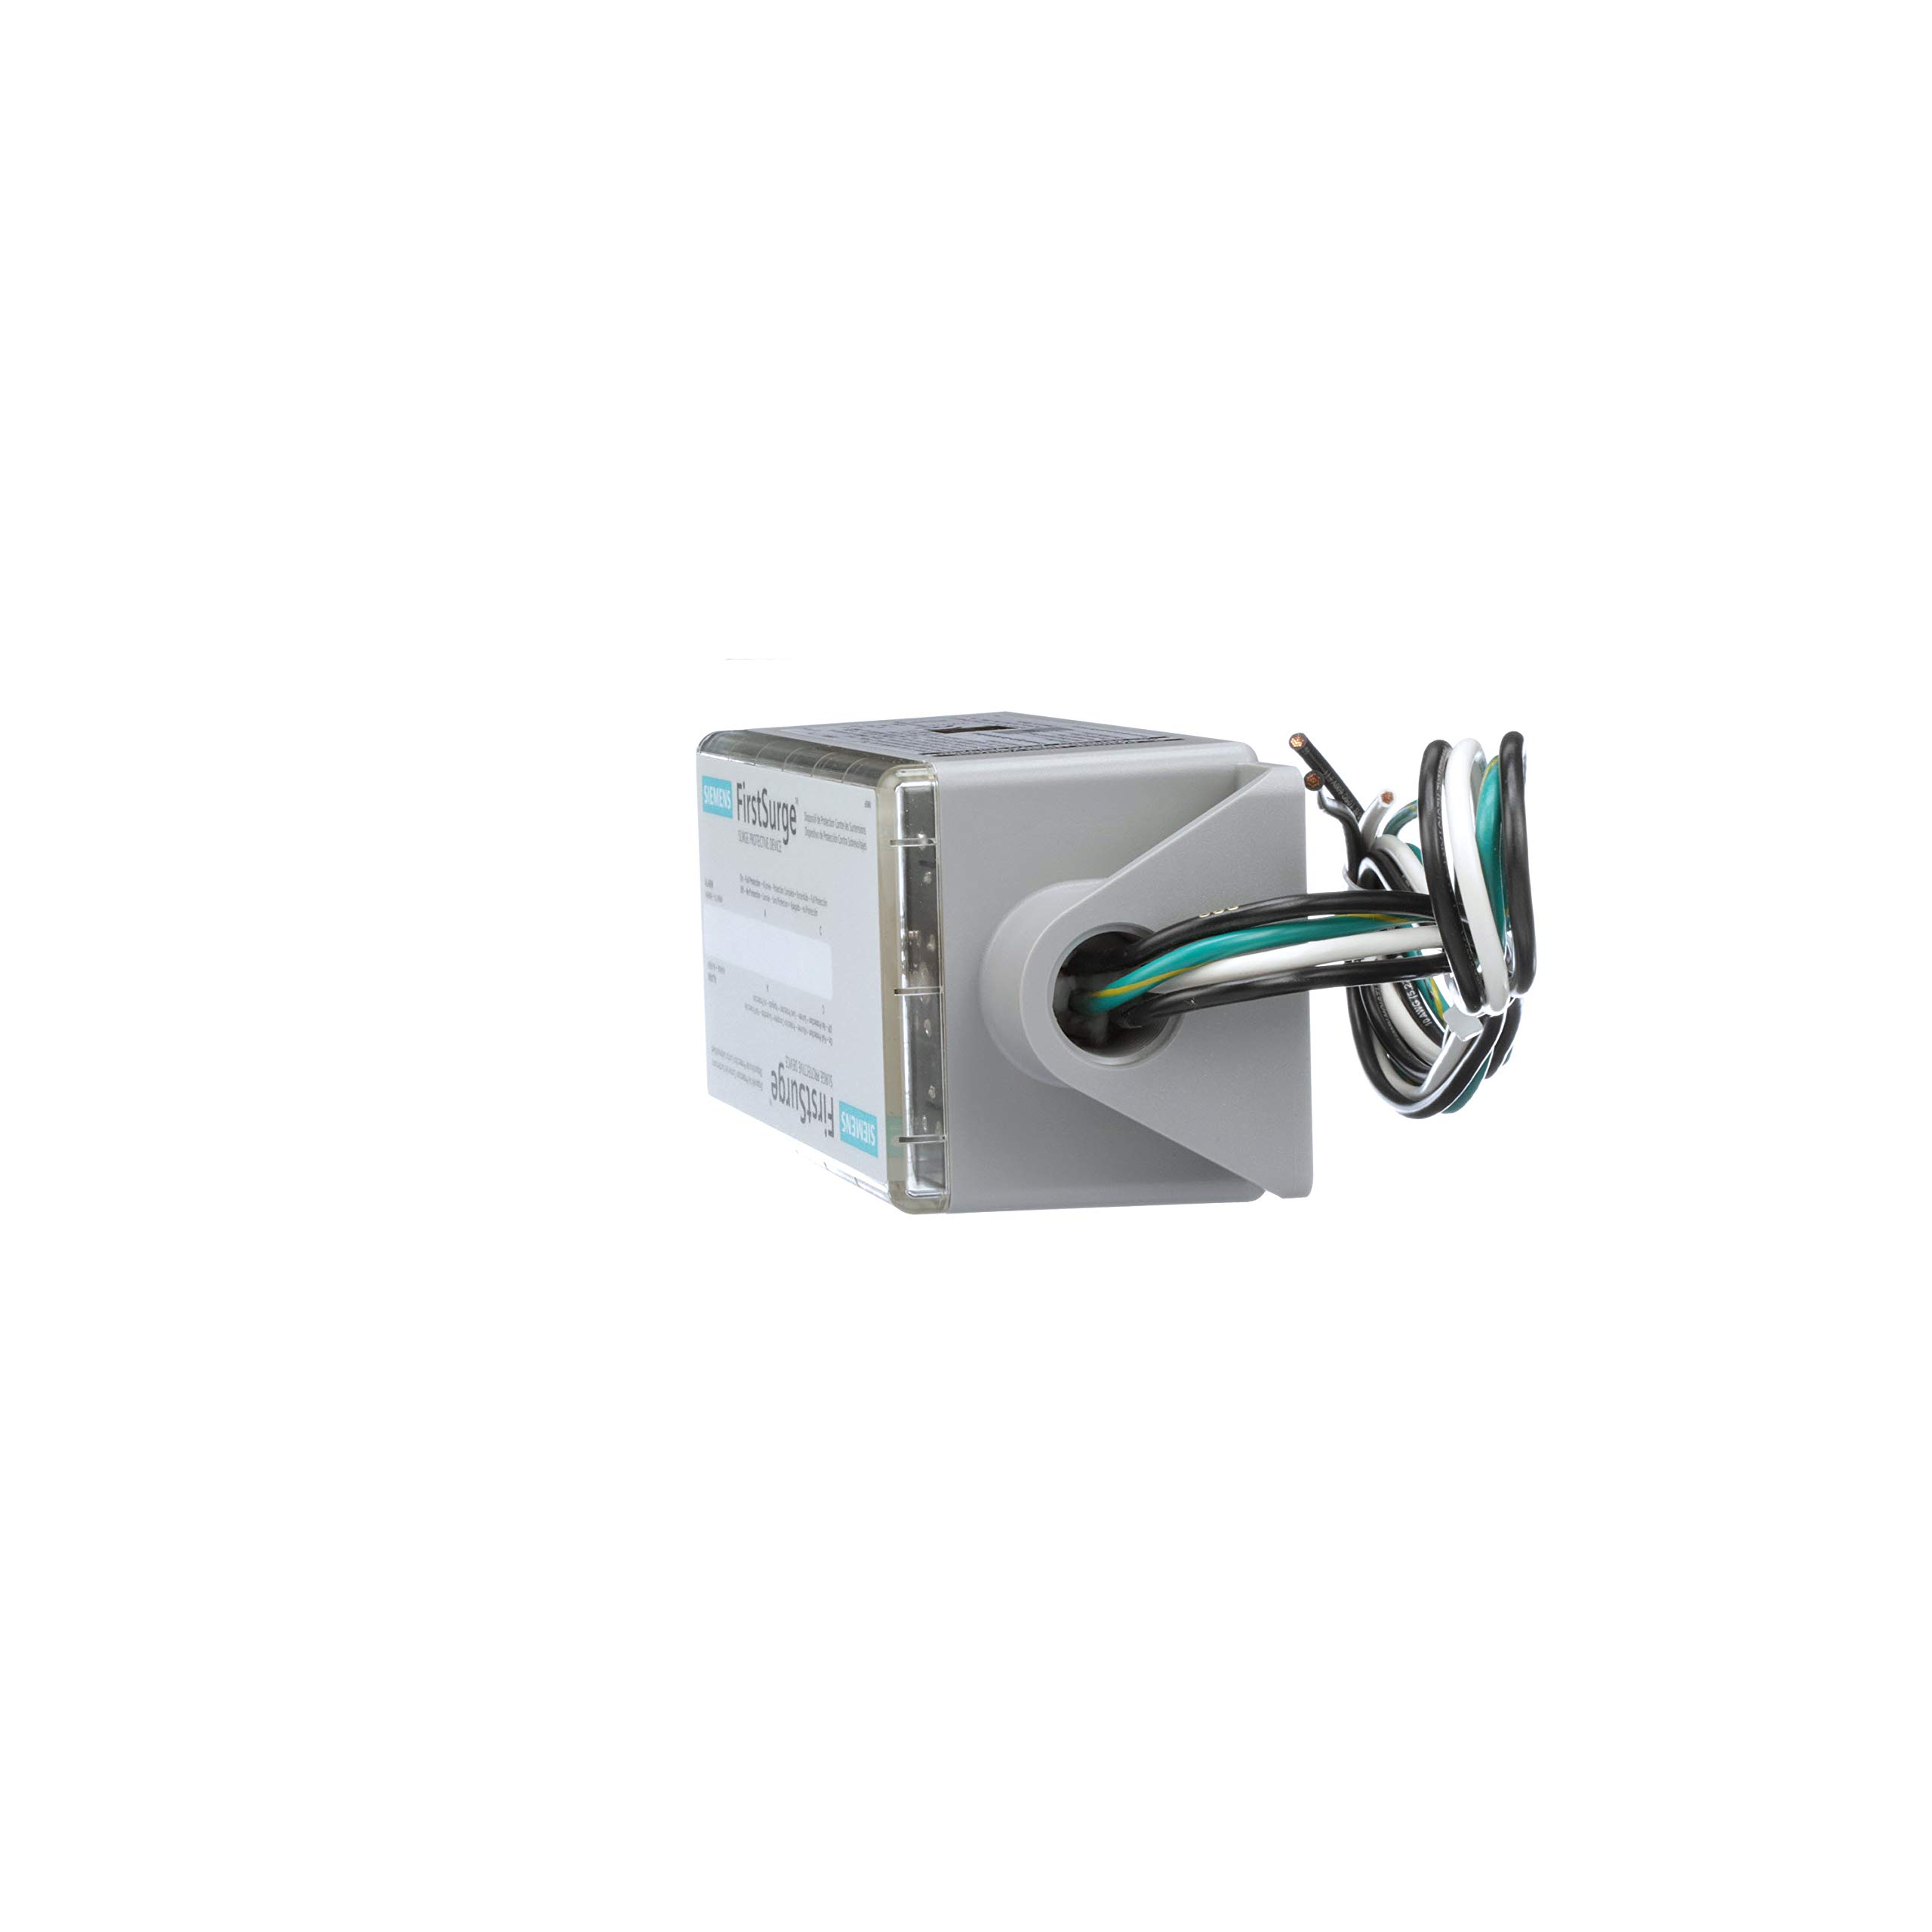 Siemens FS140 Whole House Surge Protection , Gray